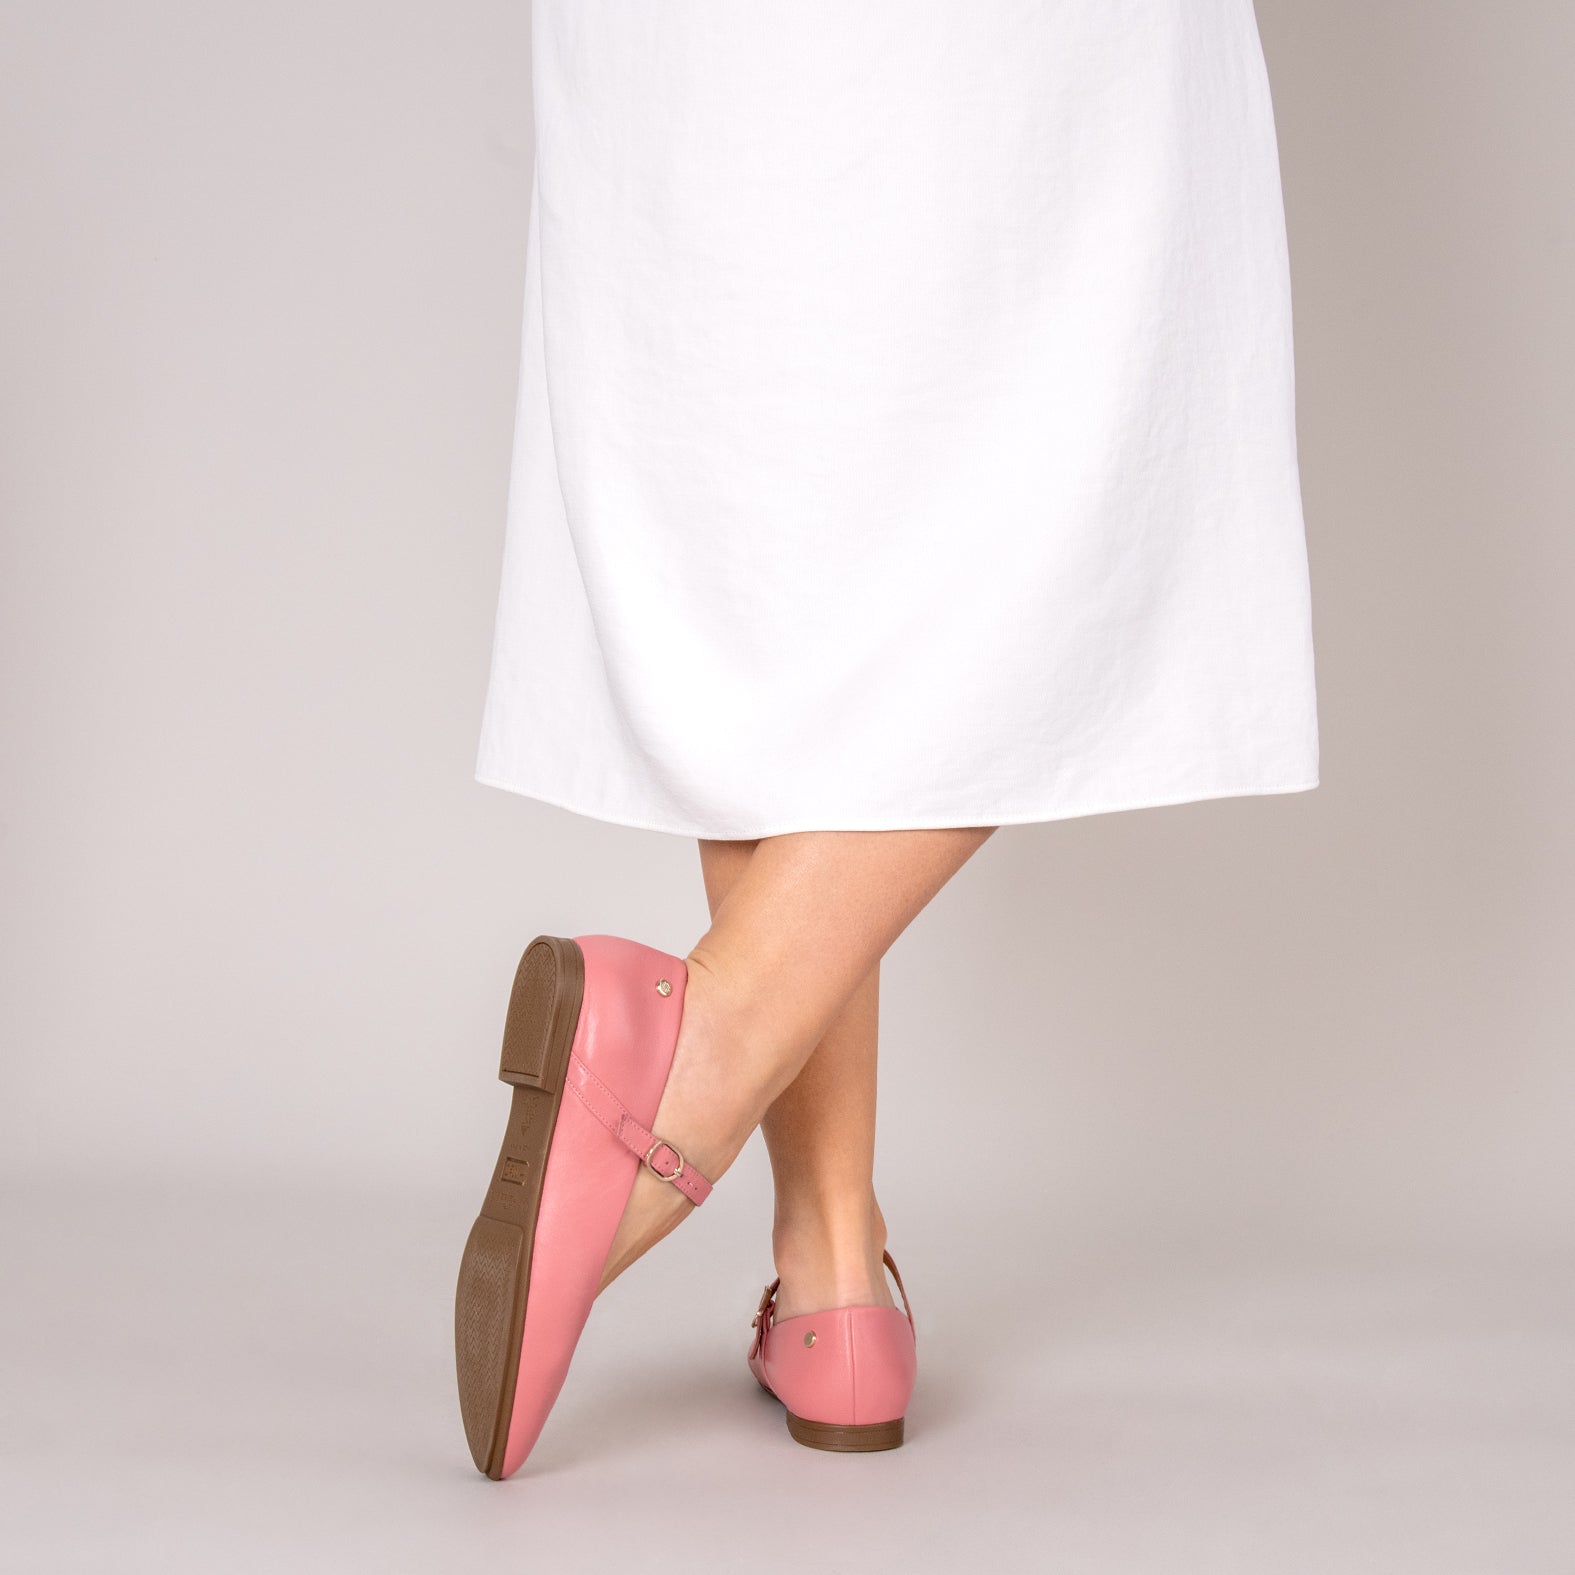 ROSALIE – PINK rounded toe Mary-Janes